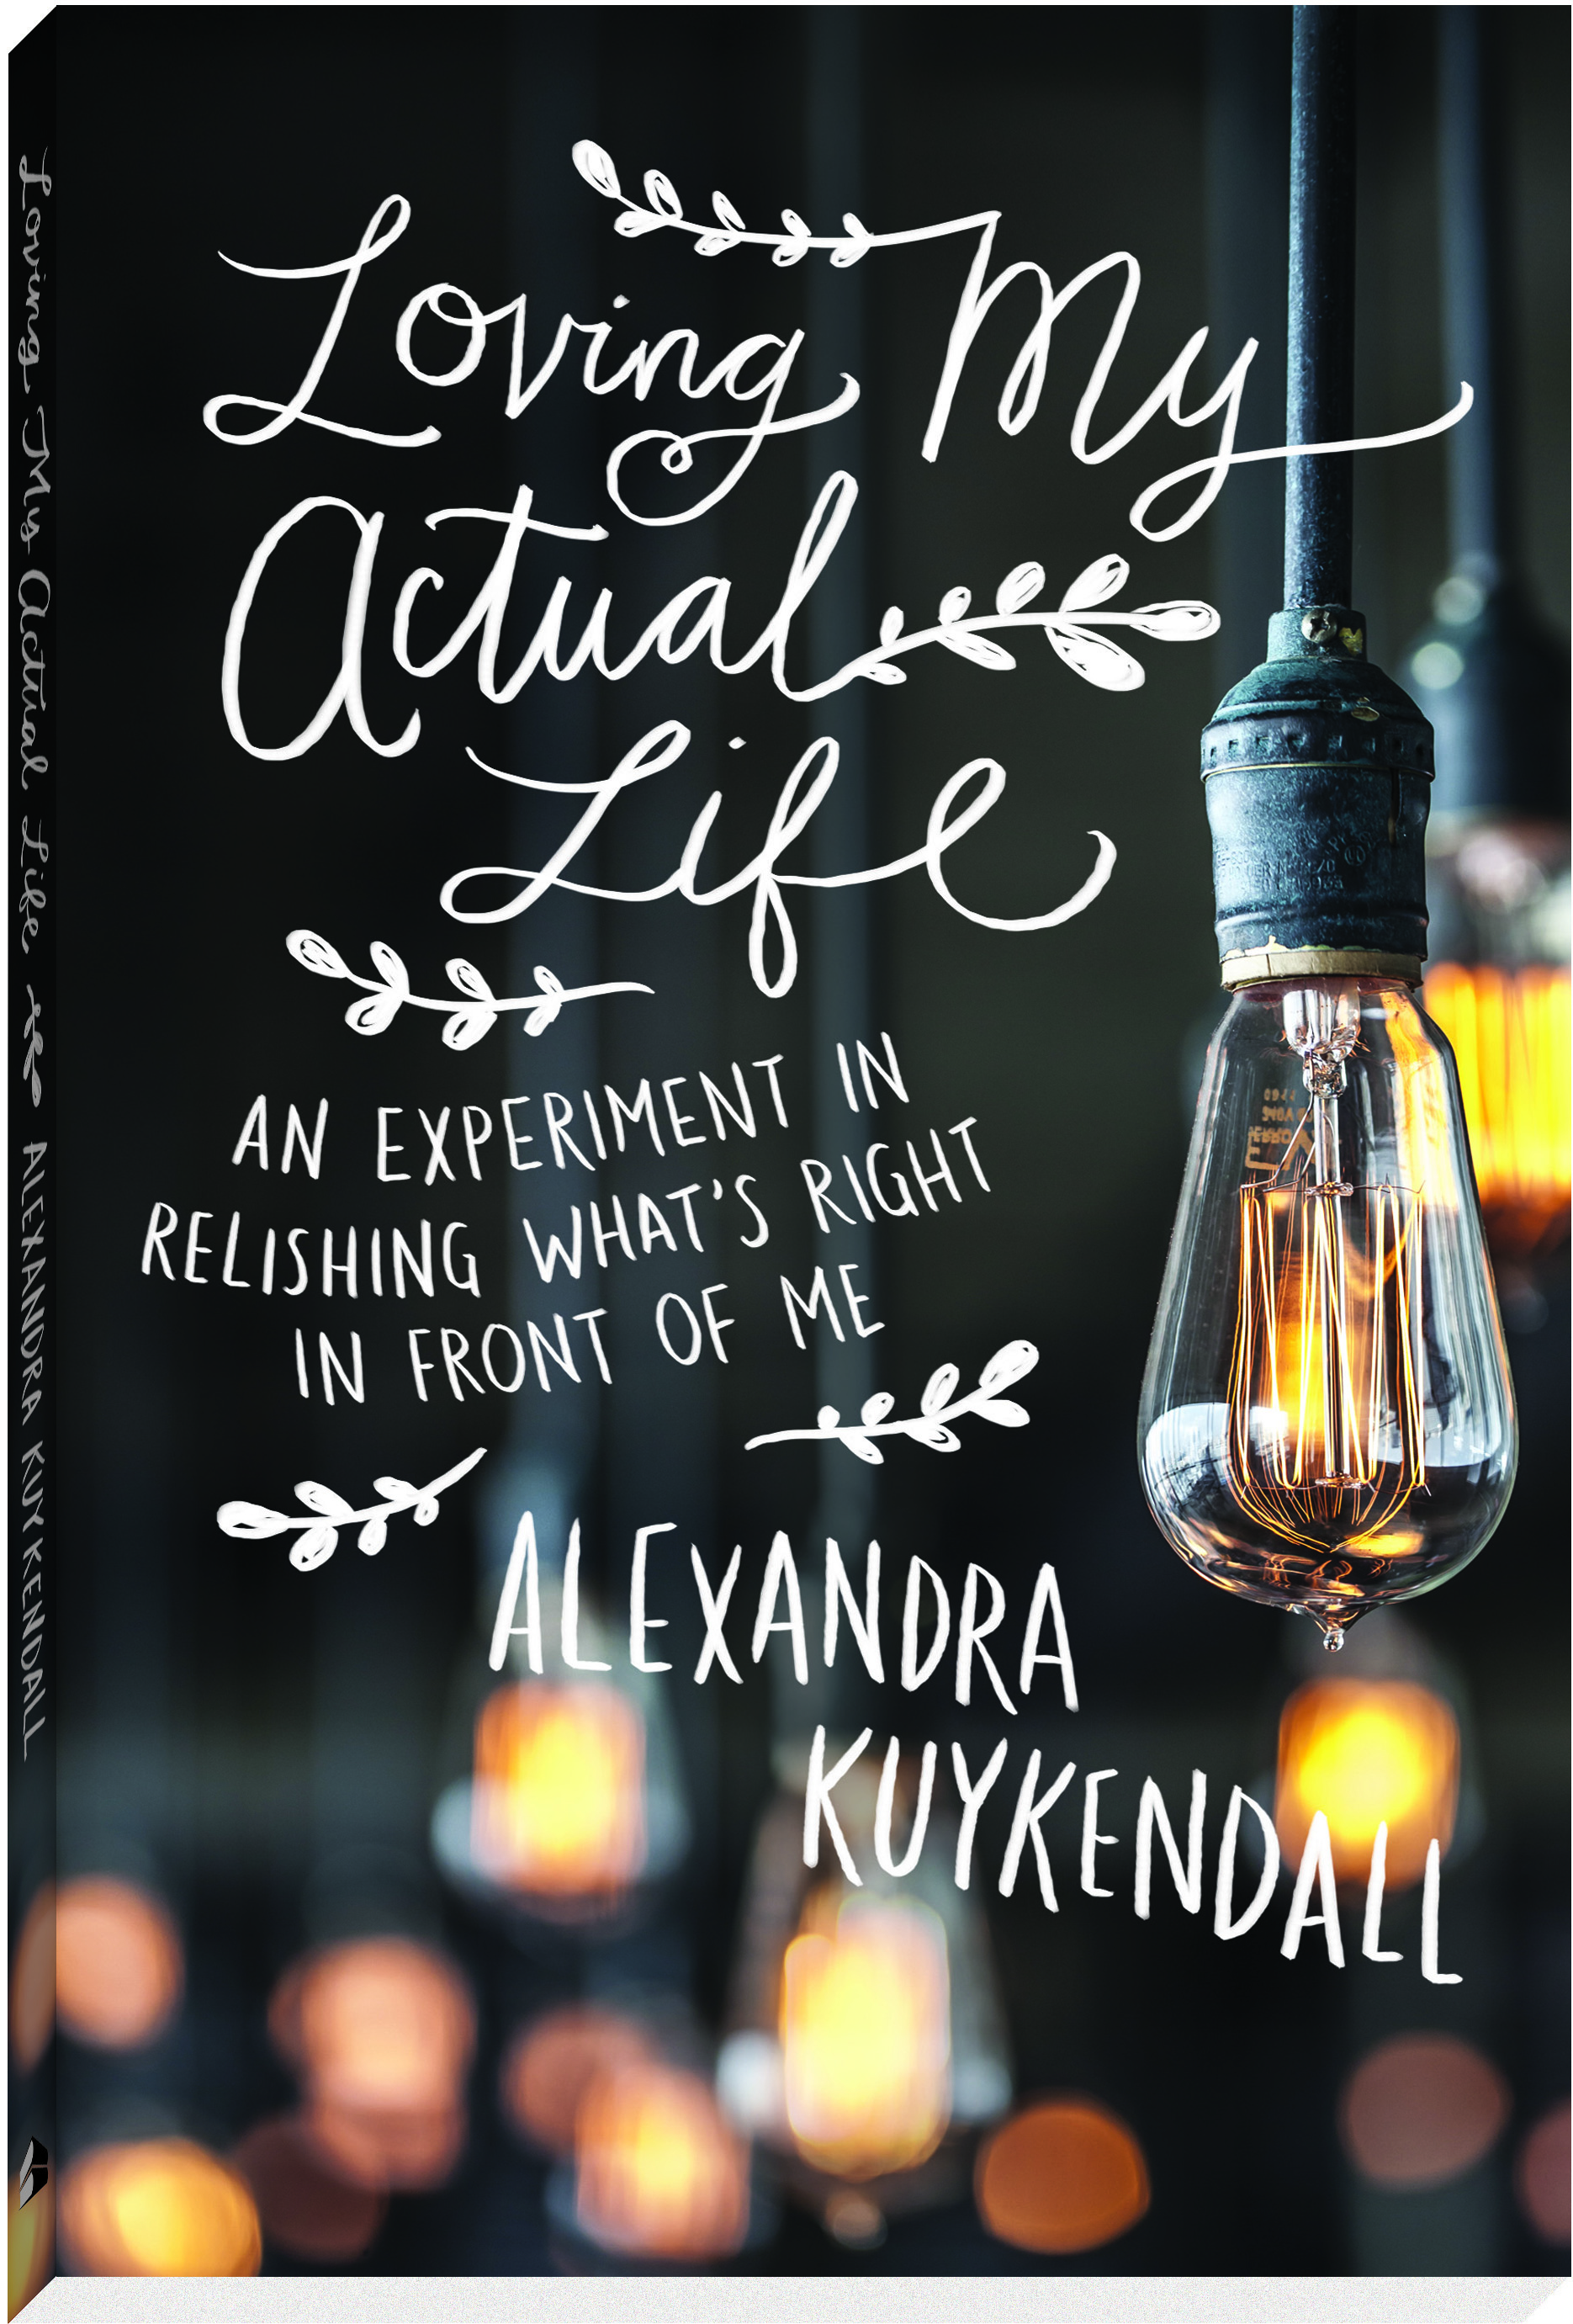 Enter to win 1 of 3 copies of Loving My Actual Life by Alexandra Kuykendall!